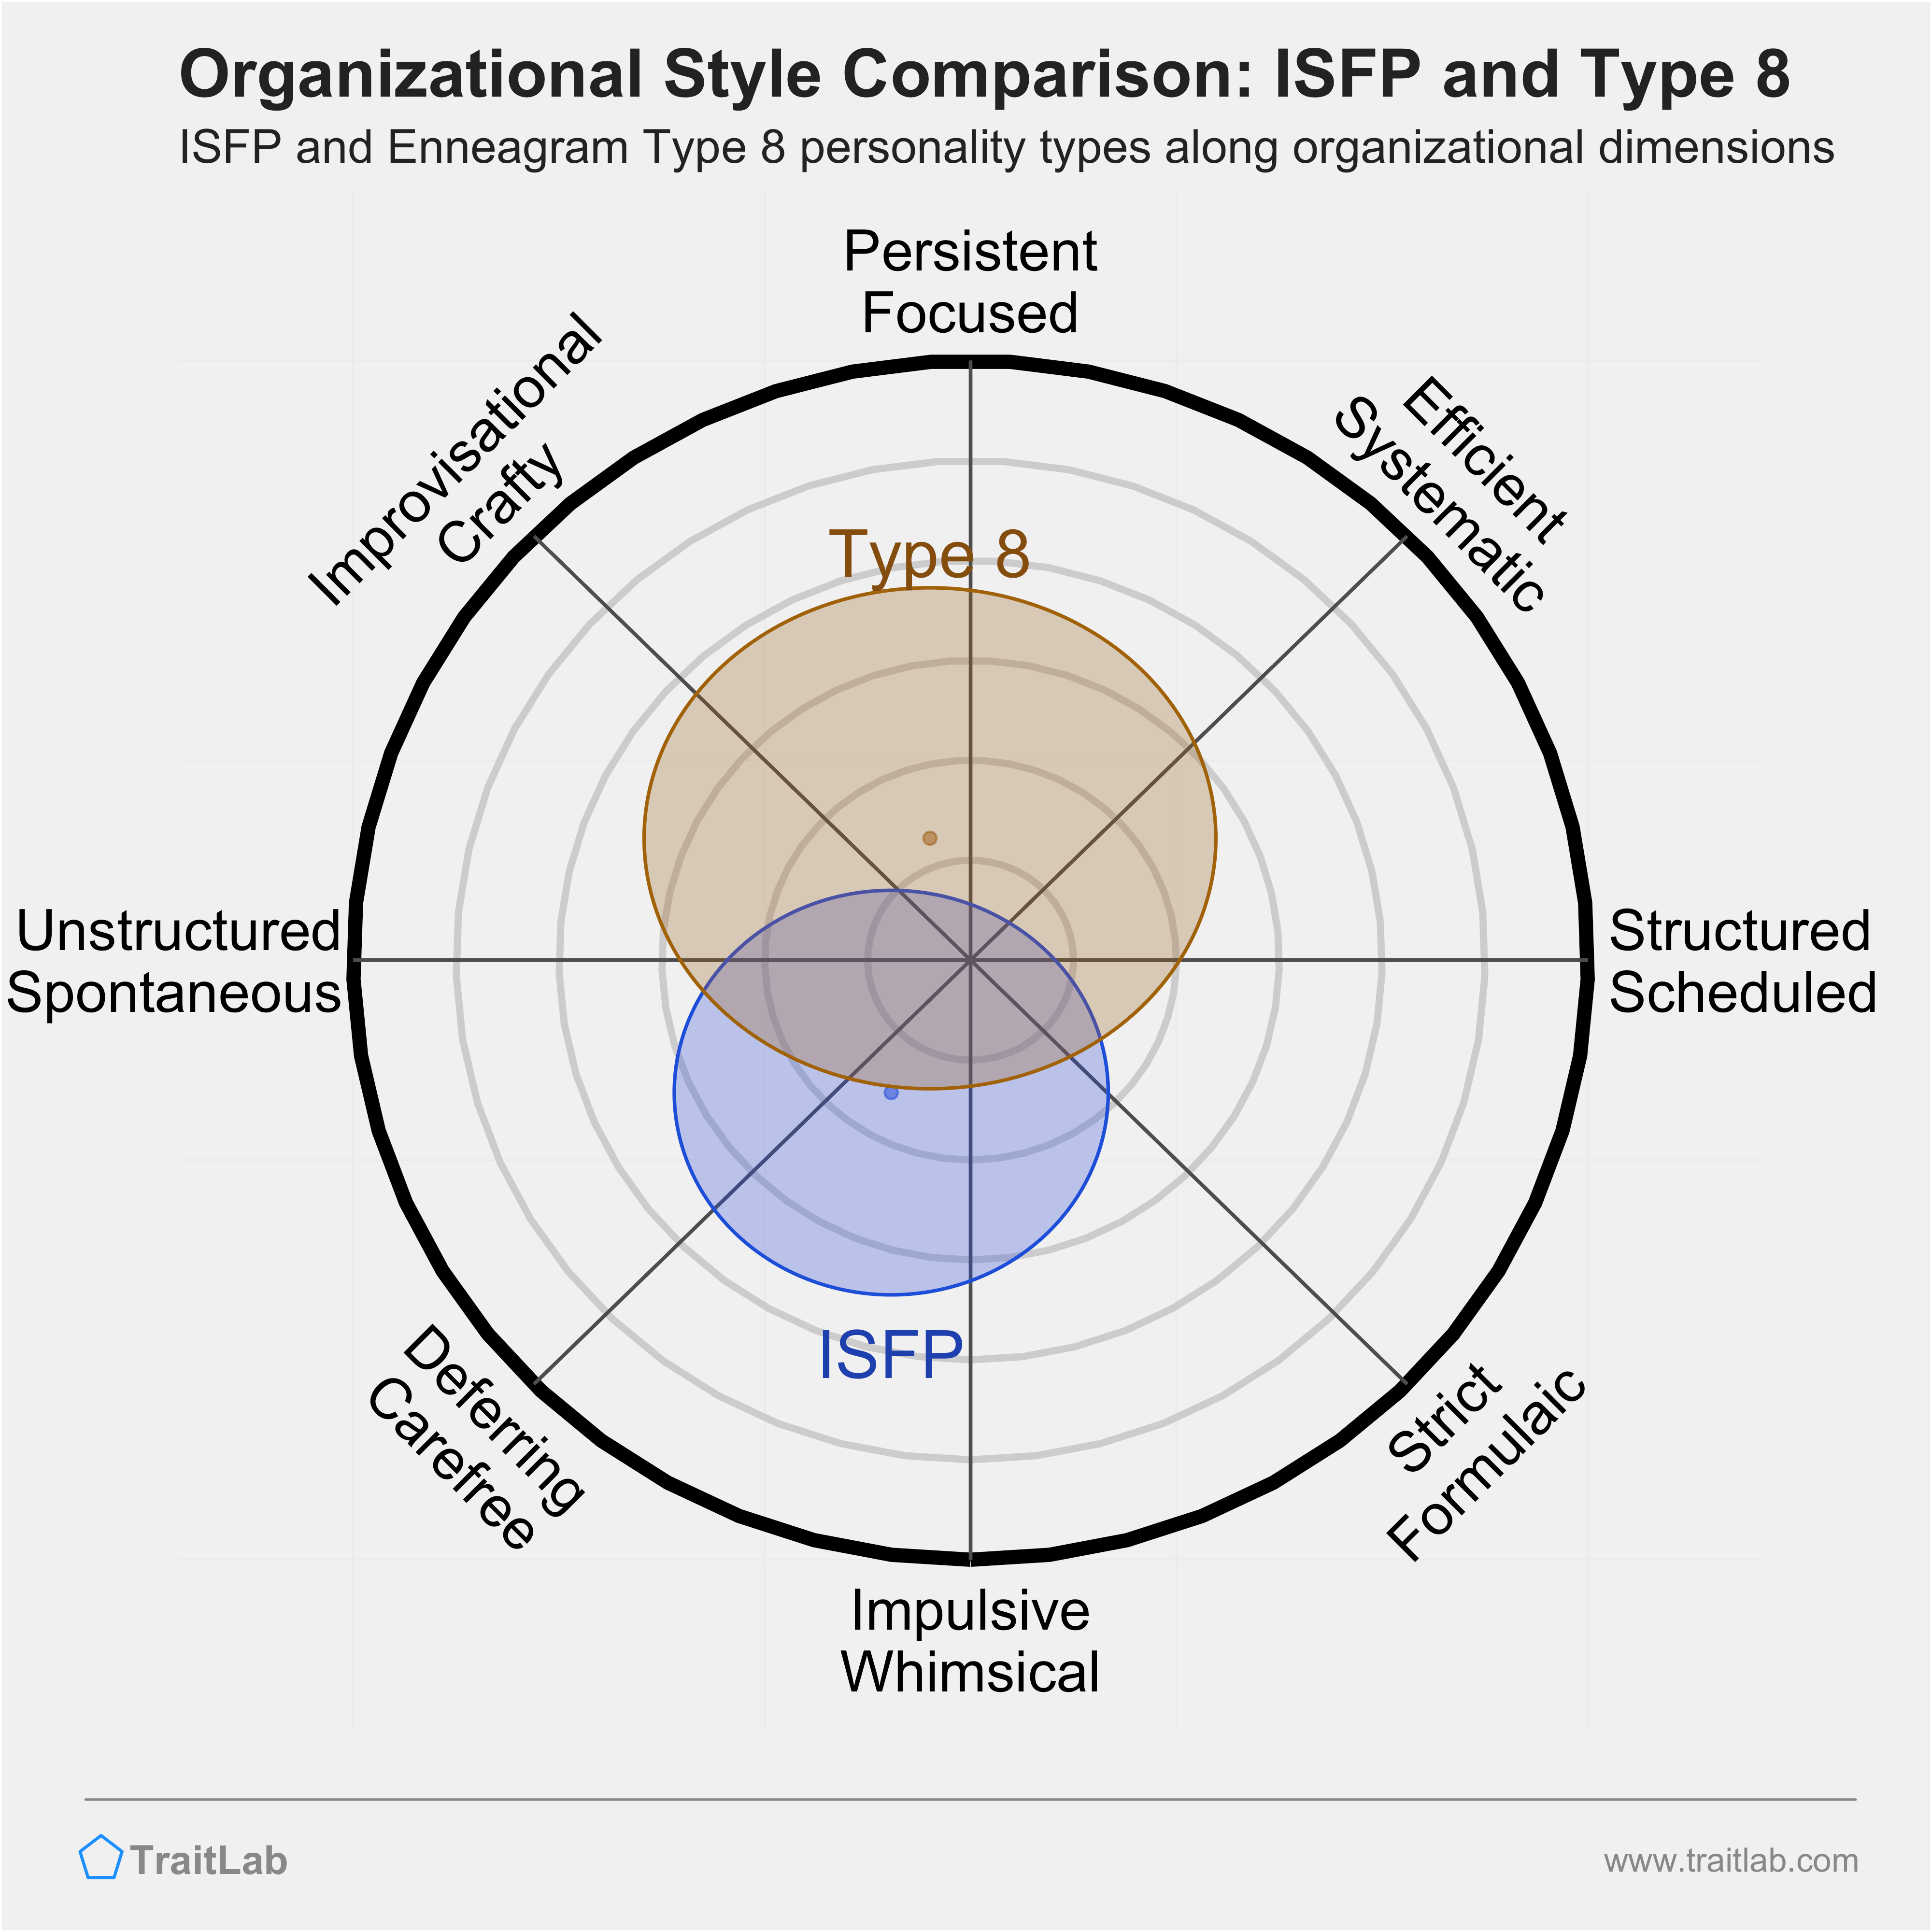 ISFP and Type 8 comparison across organizational dimensions